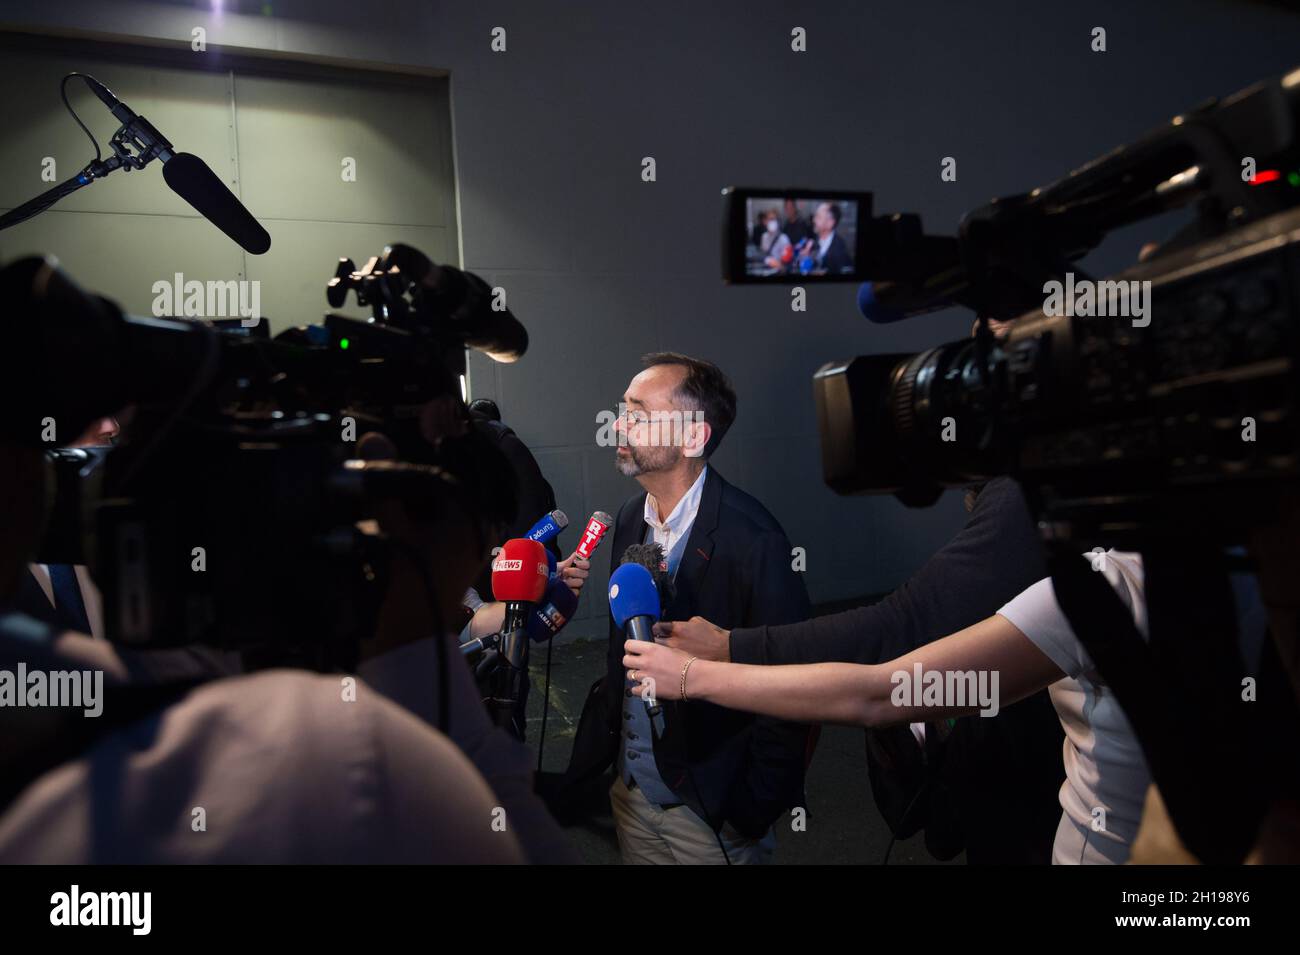 Beziers, France. 16th Oct, 2021. Robert Menard seen talking to the medias after the meeting of Eric Zemmour in Beziers.Robert Menard, close to the Rassemblement National of Marine Le Pen has invited Eric Zemmour to a dedication meeting on October 16, 2021. He insisted in his speech in a necessary alliance between Marine Le Pen and Eric Zemmour to make win the camp of the 'national right'. Credit: SOPA Images Limited/Alamy Live News Stock Photo